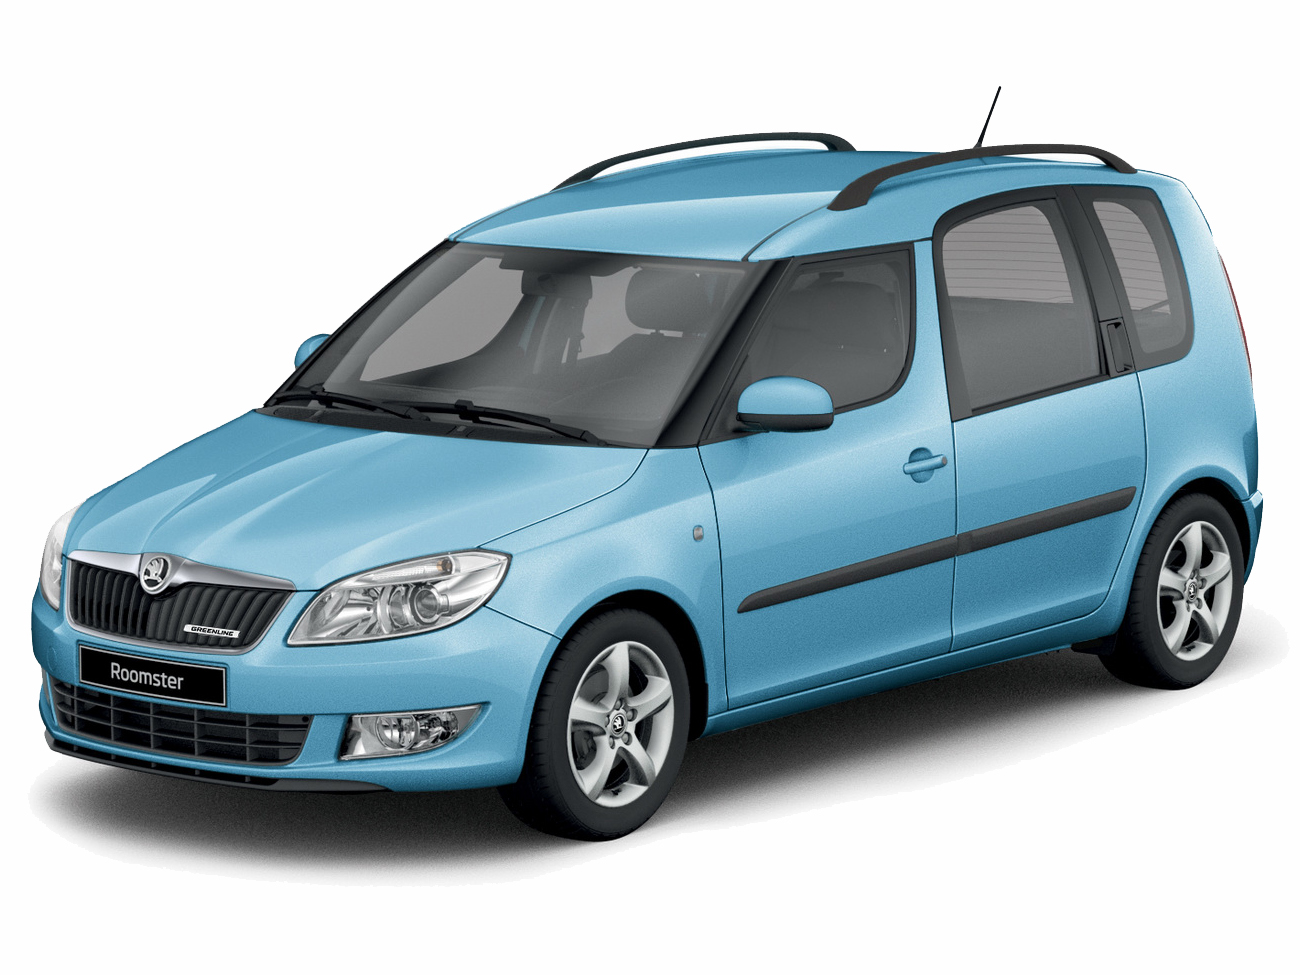 roomster review, Roomster Skoda (2006-2015)